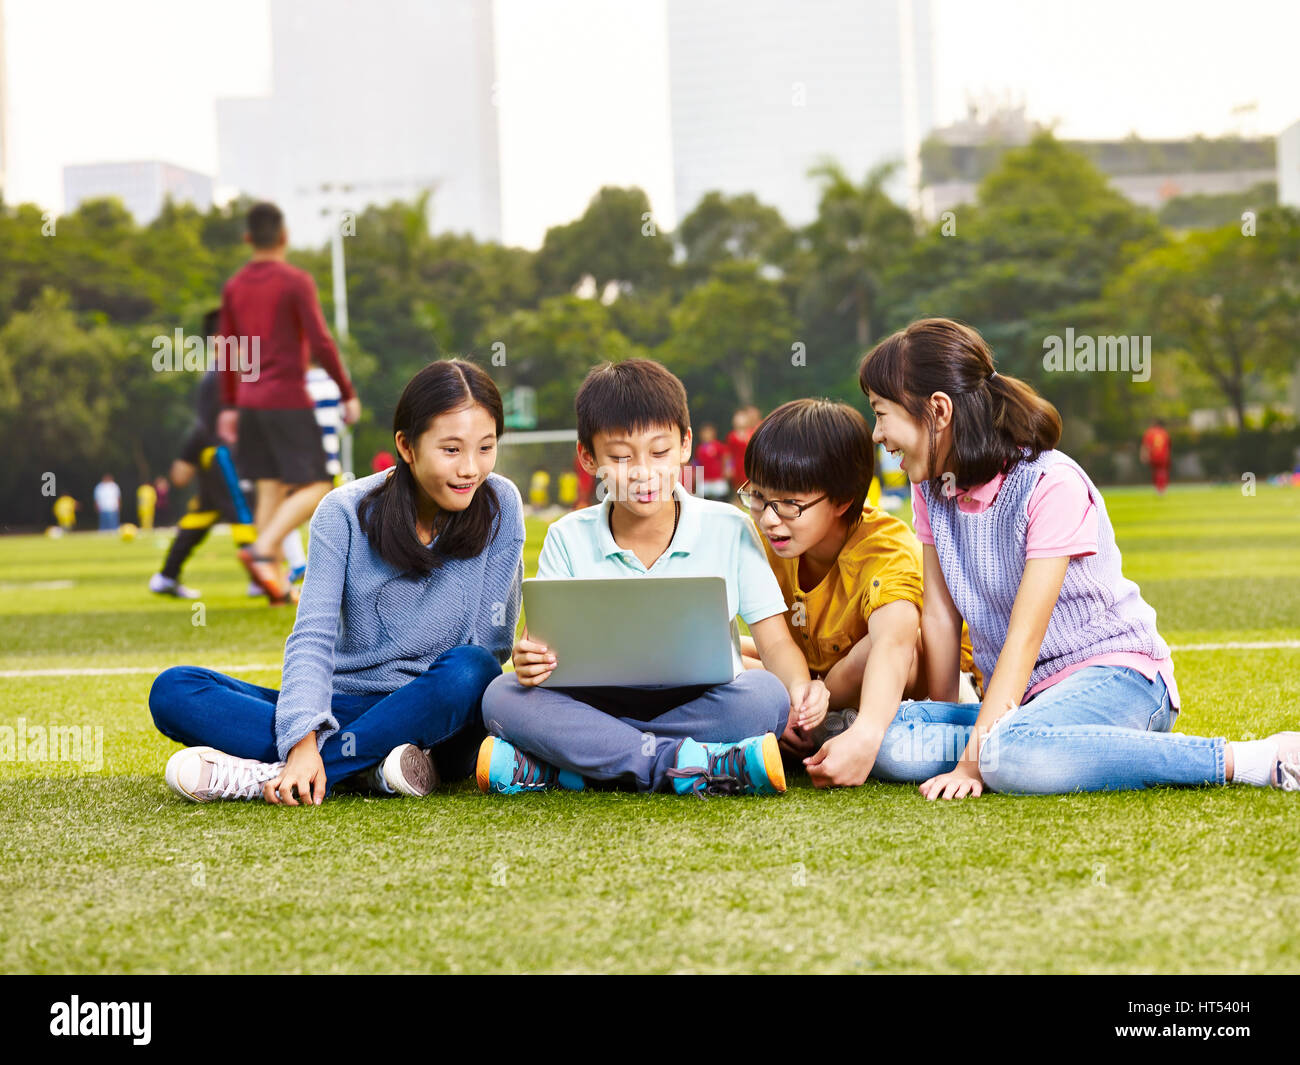 group of asian elementary school children sitting on playground grass looking at laptop computer Stock Photo